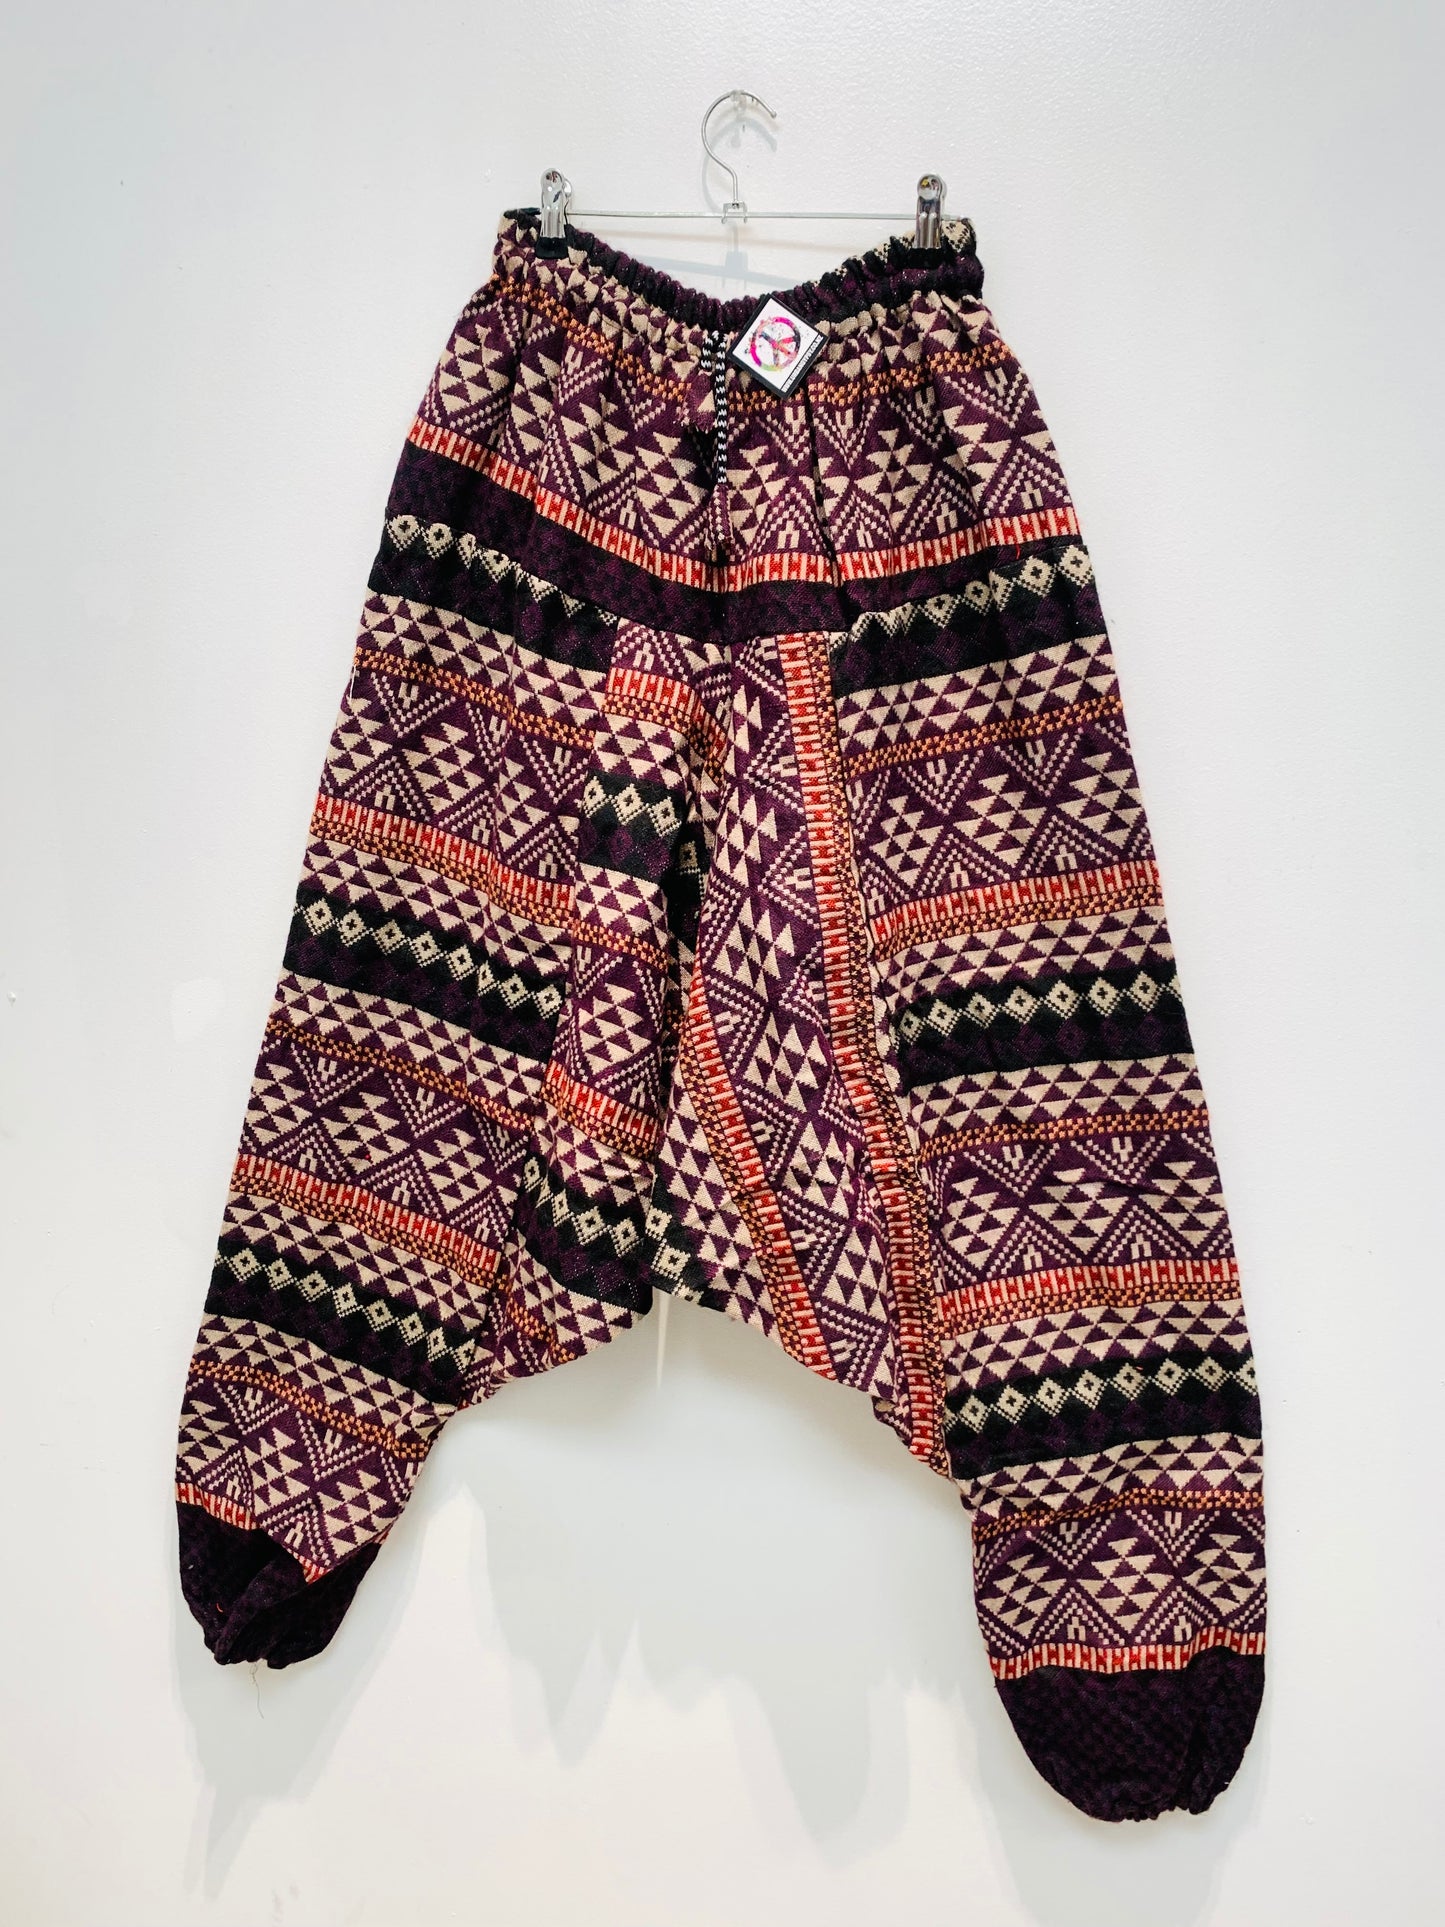 HANDCRAFTED WARM DROP CROTCH PANTS #WOOL22